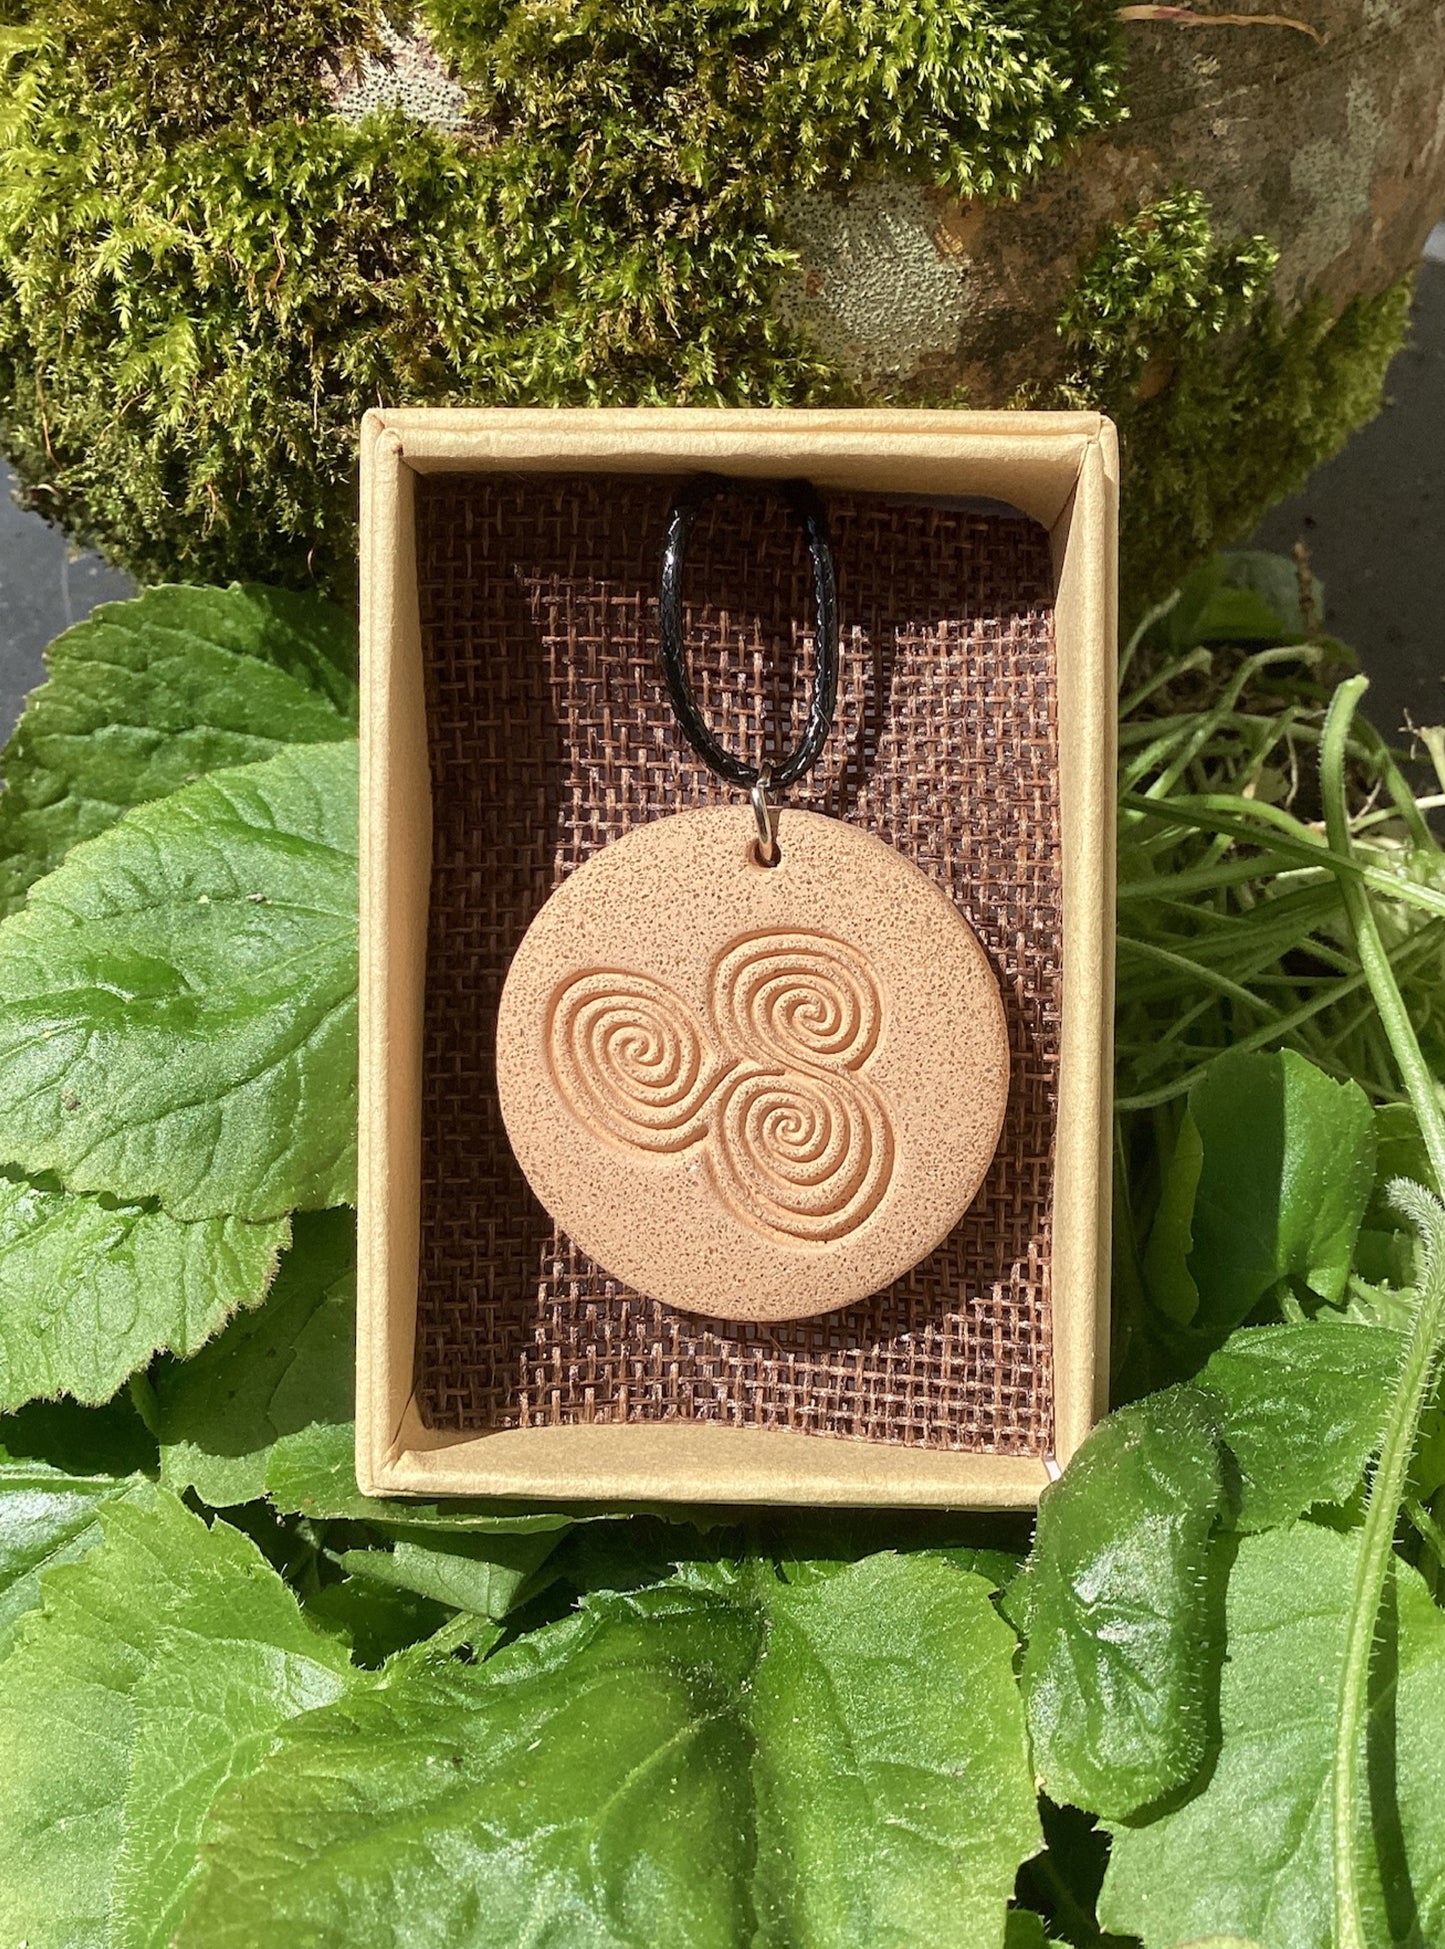 Megalithic Art Pendant with Triskele Design.